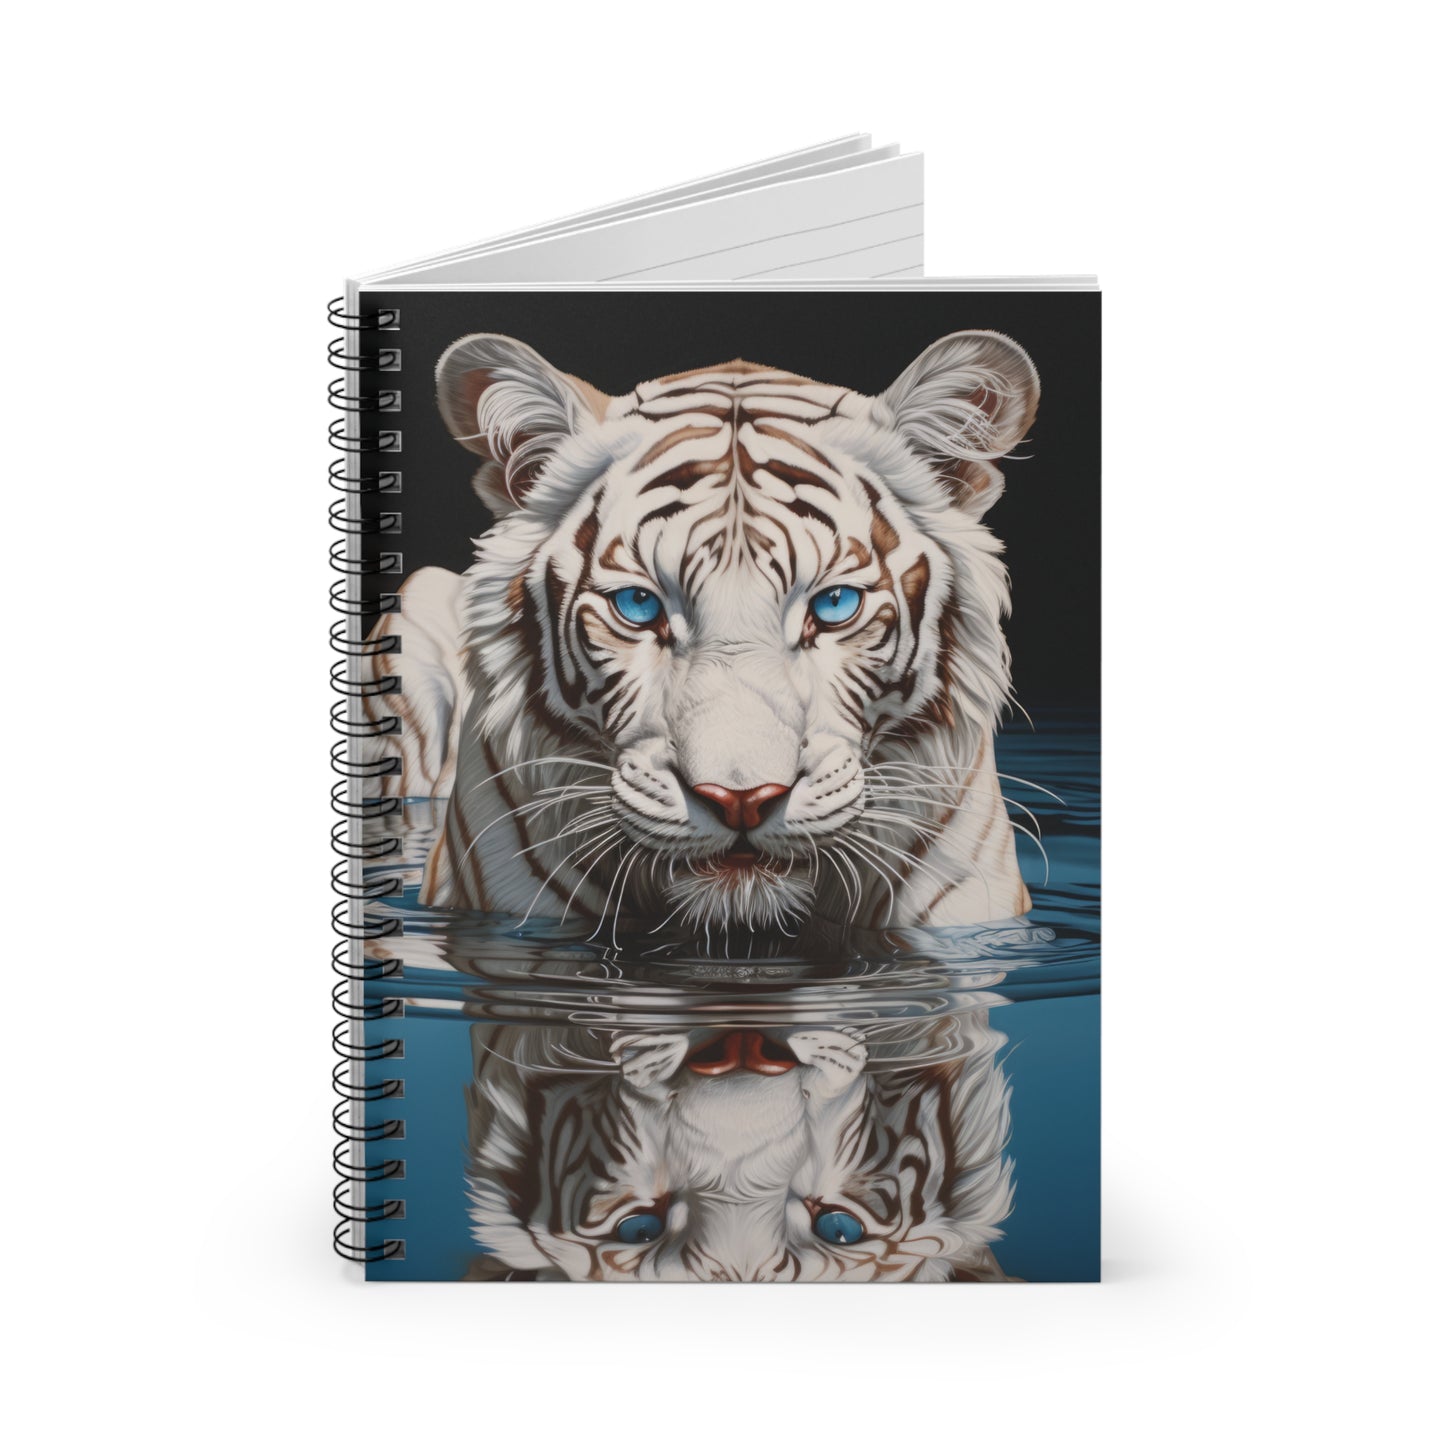 Tiger Chrome Reflections | Spiral Notebook - Ruled Line